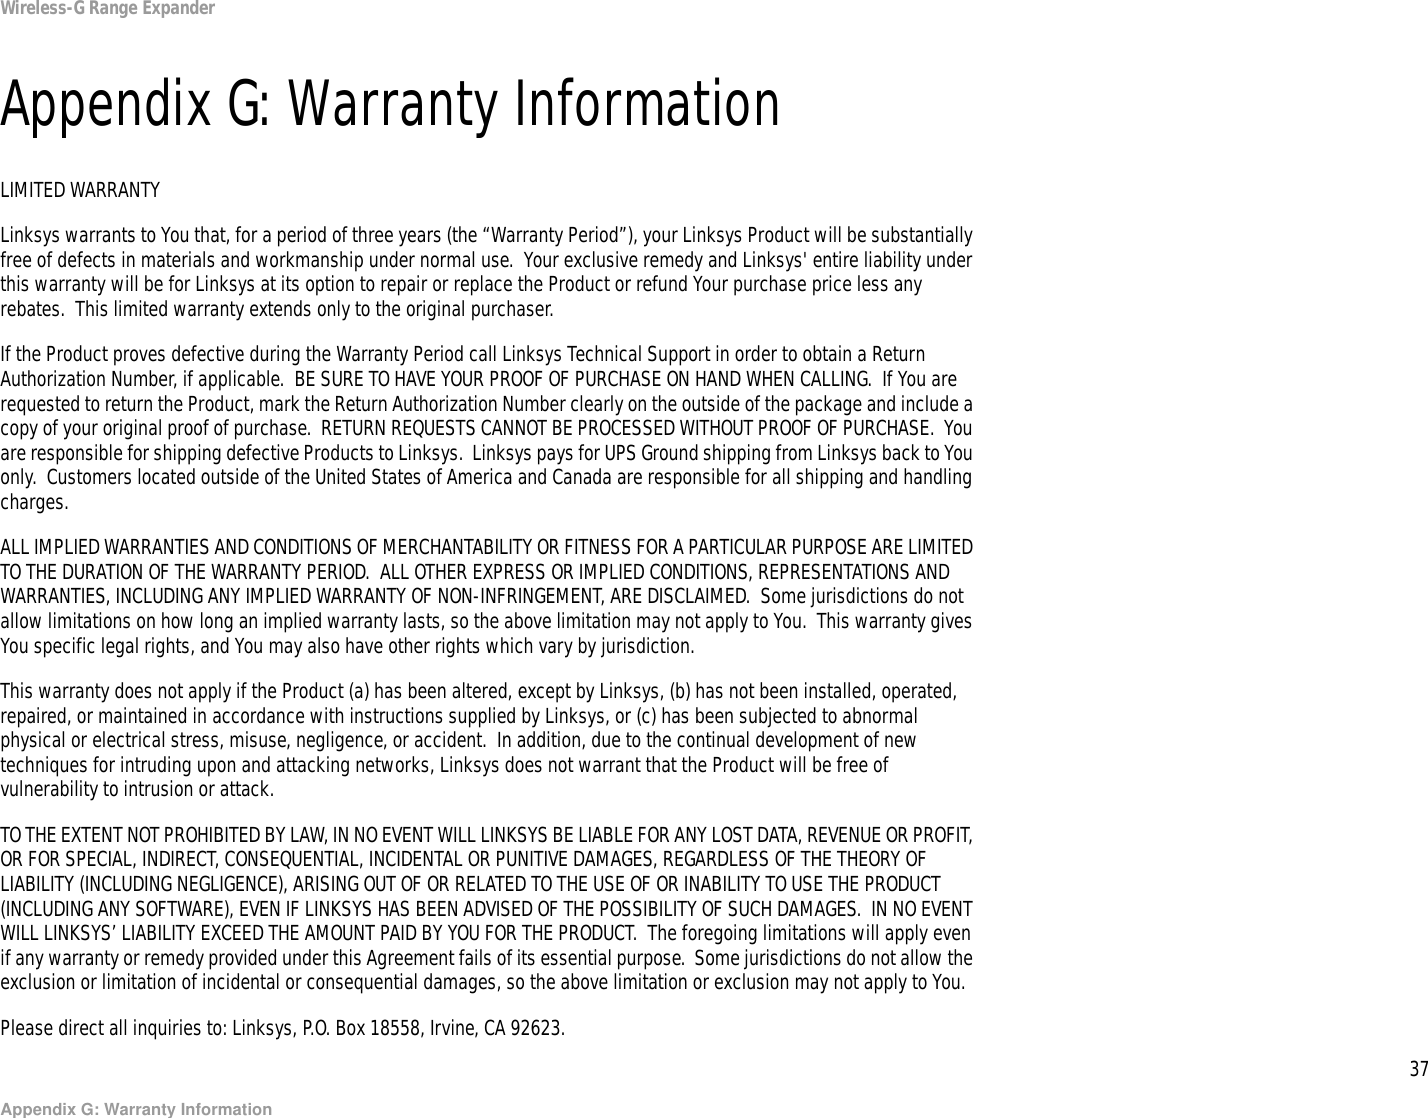 37Appendix G: Warranty InformationWireless-G Range ExpanderAppendix G: Warranty InformationLIMITED WARRANTYLinksys warrants to You that, for a period of three years (the “Warranty Period”), your Linksys Product will be substantially free of defects in materials and workmanship under normal use.  Your exclusive remedy and Linksys&apos; entire liability under this warranty will be for Linksys at its option to repair or replace the Product or refund Your purchase price less any rebates.  This limited warranty extends only to the original purchaser.  If the Product proves defective during the Warranty Period call Linksys Technical Support in order to obtain a Return Authorization Number, if applicable.  BE SURE TO HAVE YOUR PROOF OF PURCHASE ON HAND WHEN CALLING.  If You are requested to return the Product, mark the Return Authorization Number clearly on the outside of the package and include a copy of your original proof of purchase.  RETURN REQUESTS CANNOT BE PROCESSED WITHOUT PROOF OF PURCHASE.  You are responsible for shipping defective Products to Linksys.  Linksys pays for UPS Ground shipping from Linksys back to You only.  Customers located outside of the United States of America and Canada are responsible for all shipping and handling charges. ALL IMPLIED WARRANTIES AND CONDITIONS OF MERCHANTABILITY OR FITNESS FOR A PARTICULAR PURPOSE ARE LIMITED TO THE DURATION OF THE WARRANTY PERIOD.  ALL OTHER EXPRESS OR IMPLIED CONDITIONS, REPRESENTATIONS AND WARRANTIES, INCLUDING ANY IMPLIED WARRANTY OF NON-INFRINGEMENT, ARE DISCLAIMED.  Some jurisdictions do not allow limitations on how long an implied warranty lasts, so the above limitation may not apply to You.  This warranty gives You specific legal rights, and You may also have other rights which vary by jurisdiction.This warranty does not apply if the Product (a) has been altered, except by Linksys, (b) has not been installed, operated, repaired, or maintained in accordance with instructions supplied by Linksys, or (c) has been subjected to abnormal physical or electrical stress, misuse, negligence, or accident.  In addition, due to the continual development of new techniques for intruding upon and attacking networks, Linksys does not warrant that the Product will be free of vulnerability to intrusion or attack.TO THE EXTENT NOT PROHIBITED BY LAW, IN NO EVENT WILL LINKSYS BE LIABLE FOR ANY LOST DATA, REVENUE OR PROFIT, OR FOR SPECIAL, INDIRECT, CONSEQUENTIAL, INCIDENTAL OR PUNITIVE DAMAGES, REGARDLESS OF THE THEORY OF LIABILITY (INCLUDING NEGLIGENCE), ARISING OUT OF OR RELATED TO THE USE OF OR INABILITY TO USE THE PRODUCT (INCLUDING ANY SOFTWARE), EVEN IF LINKSYS HAS BEEN ADVISED OF THE POSSIBILITY OF SUCH DAMAGES.  IN NO EVENT WILL LINKSYS’ LIABILITY EXCEED THE AMOUNT PAID BY YOU FOR THE PRODUCT.  The foregoing limitations will apply even if any warranty or remedy provided under this Agreement fails of its essential purpose.  Some jurisdictions do not allow the exclusion or limitation of incidental or consequential damages, so the above limitation or exclusion may not apply to You.Please direct all inquiries to: Linksys, P.O. Box 18558, Irvine, CA 92623.